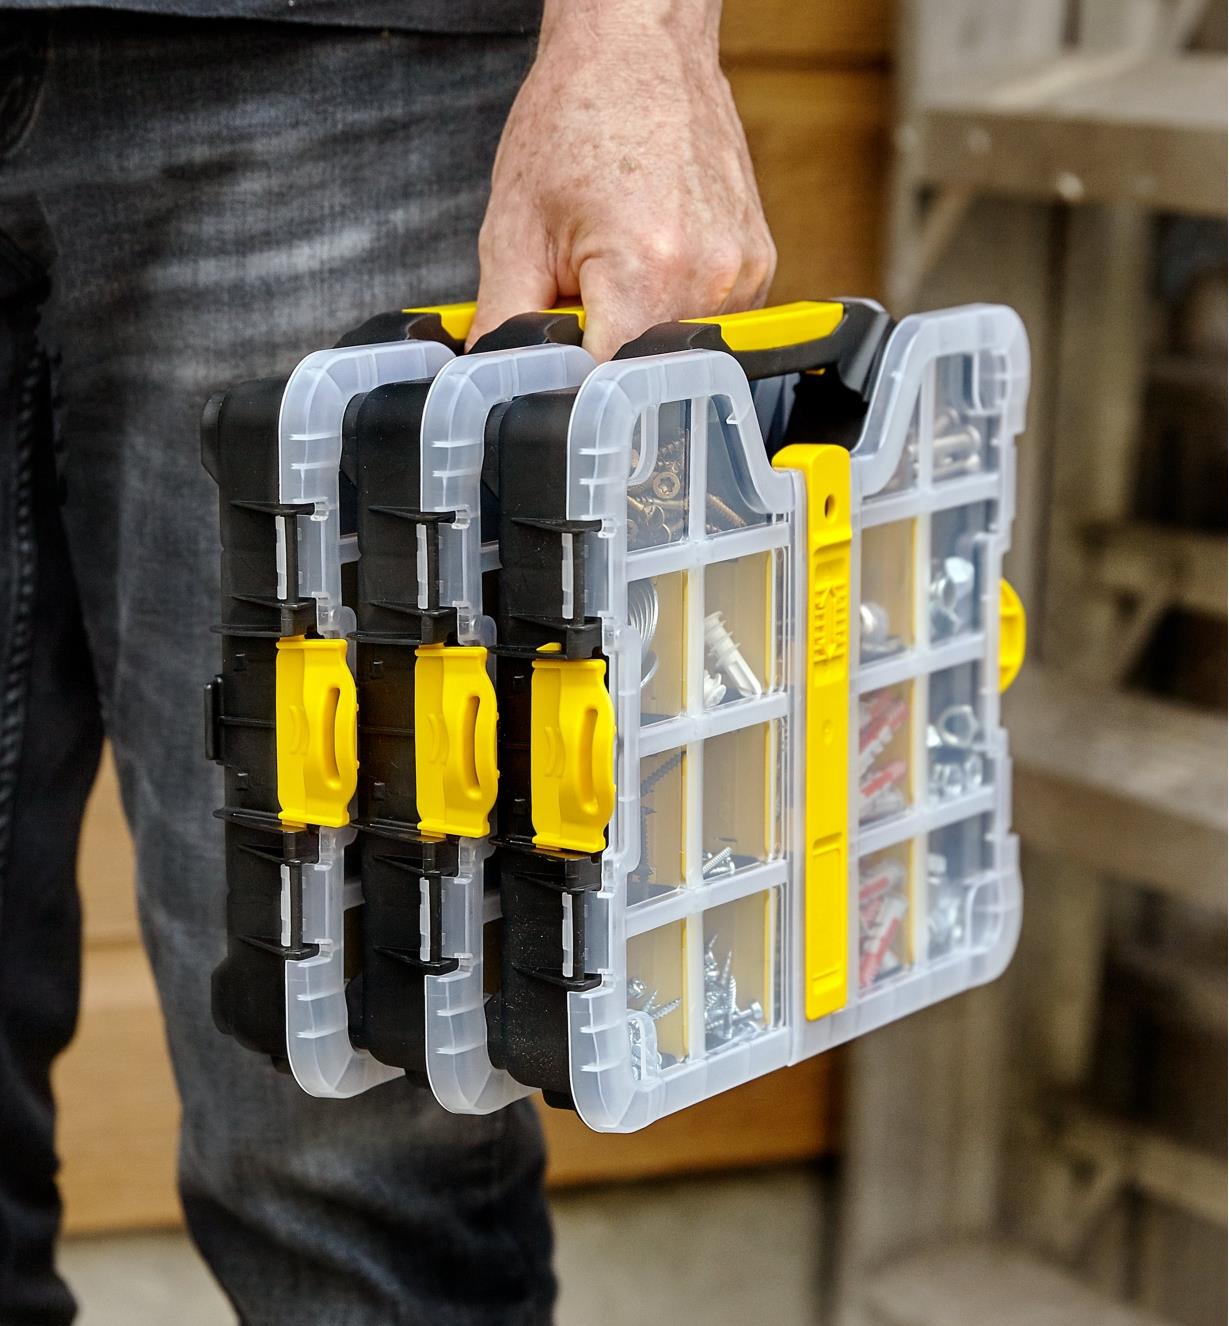 A person carries three 9" × 11" cases clipped together and filled with screws and drywall anchors